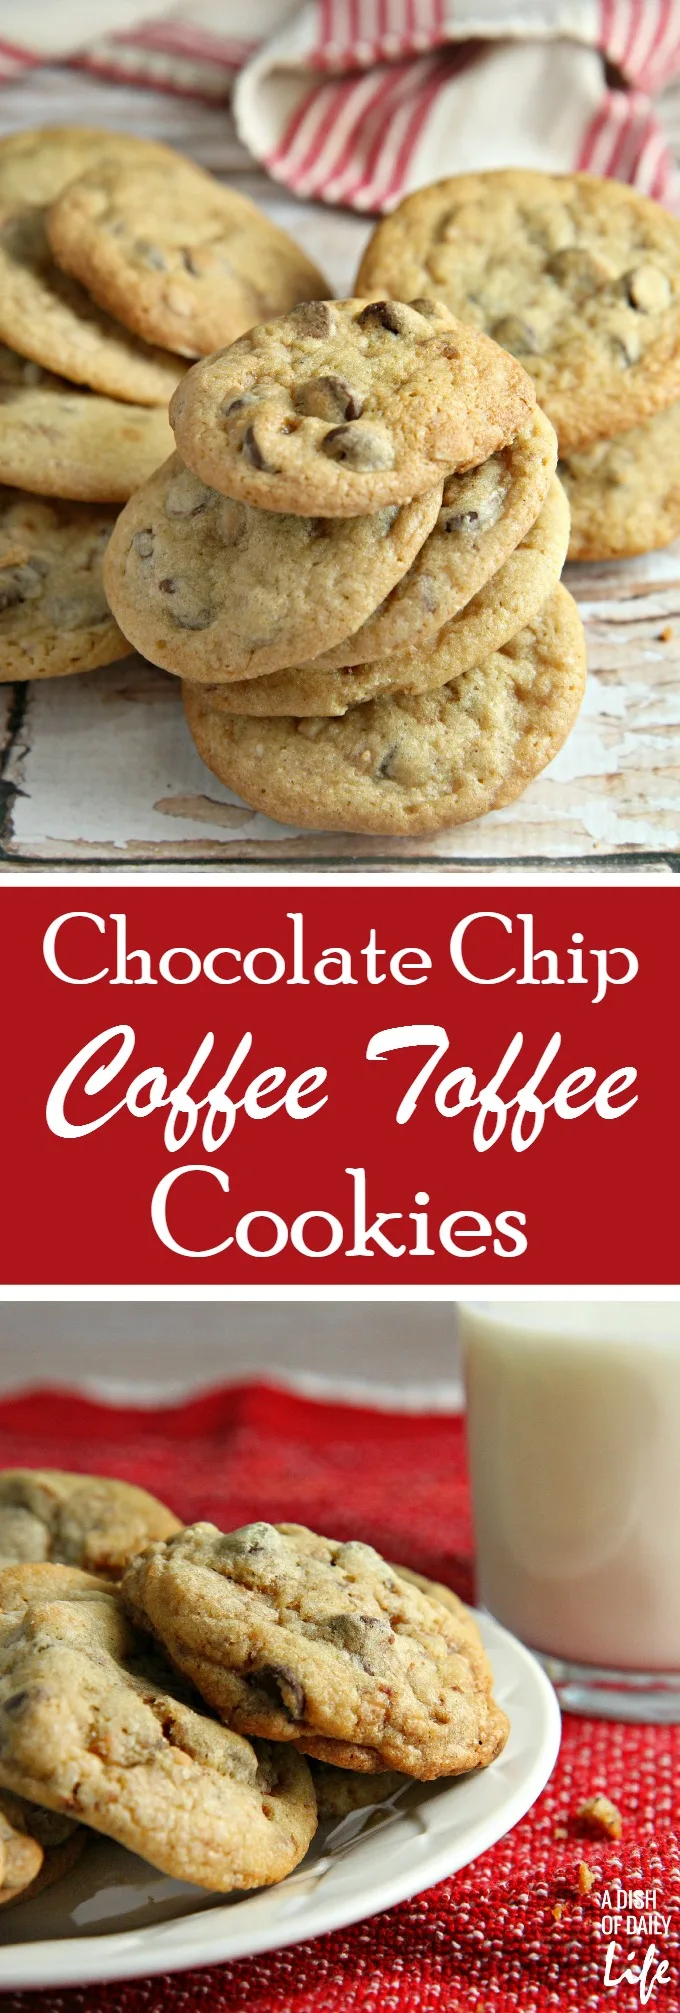 These chocolate chip coffee toffee cookies may look like an ordinary chocolate chip cookie, but bite into one and you are in for a delicious surprise! The toffee bits and a hint of coffee take the flavor of these chocolate chip cookies to a new level. You're definitely going to want to add them to your holiday baking list!